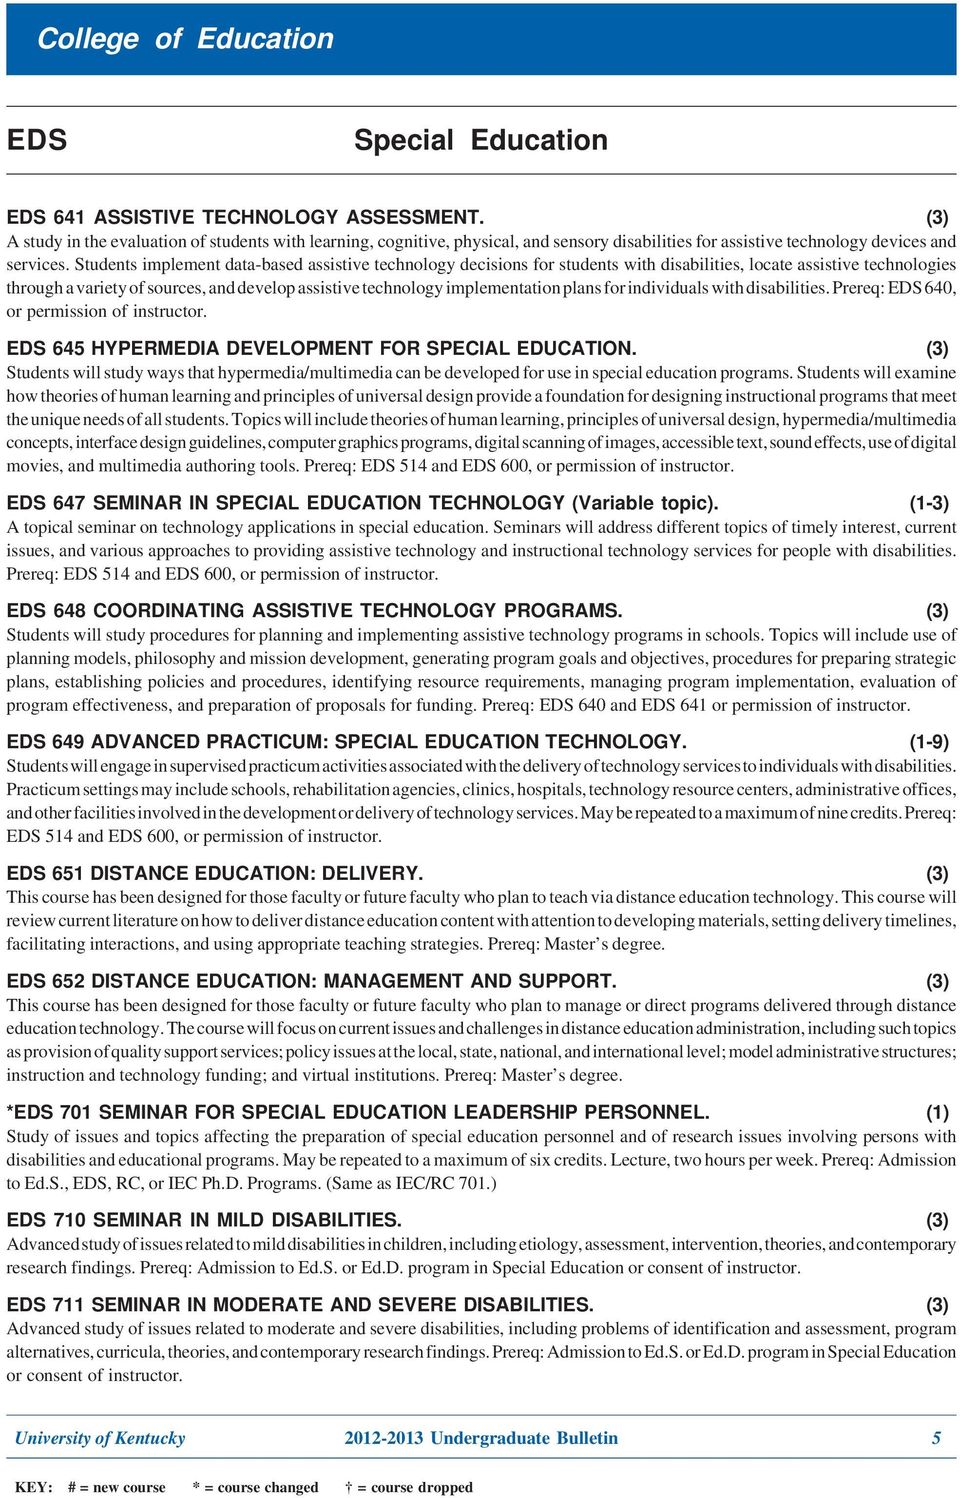 implementation plans for individuals with disabilities. Prereq: 640, or permission of instructor. 645 HYPERMEDIA DEVELOPMENT FOR SPECIAL EDUCATION.